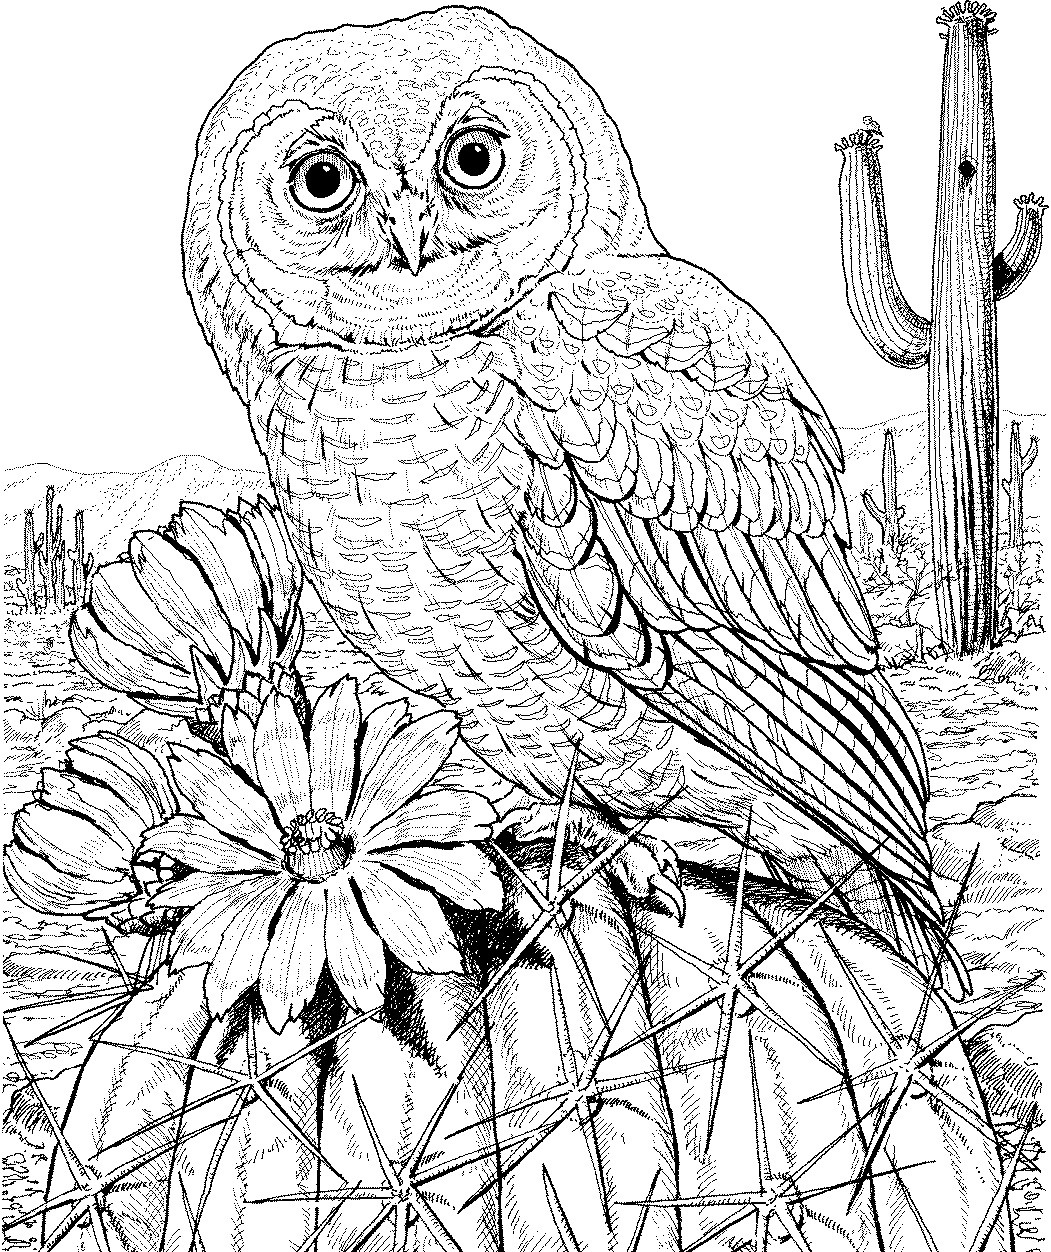 Owl Coloring Book For Adults
 10 Difficult Owl Coloring Page For Adults